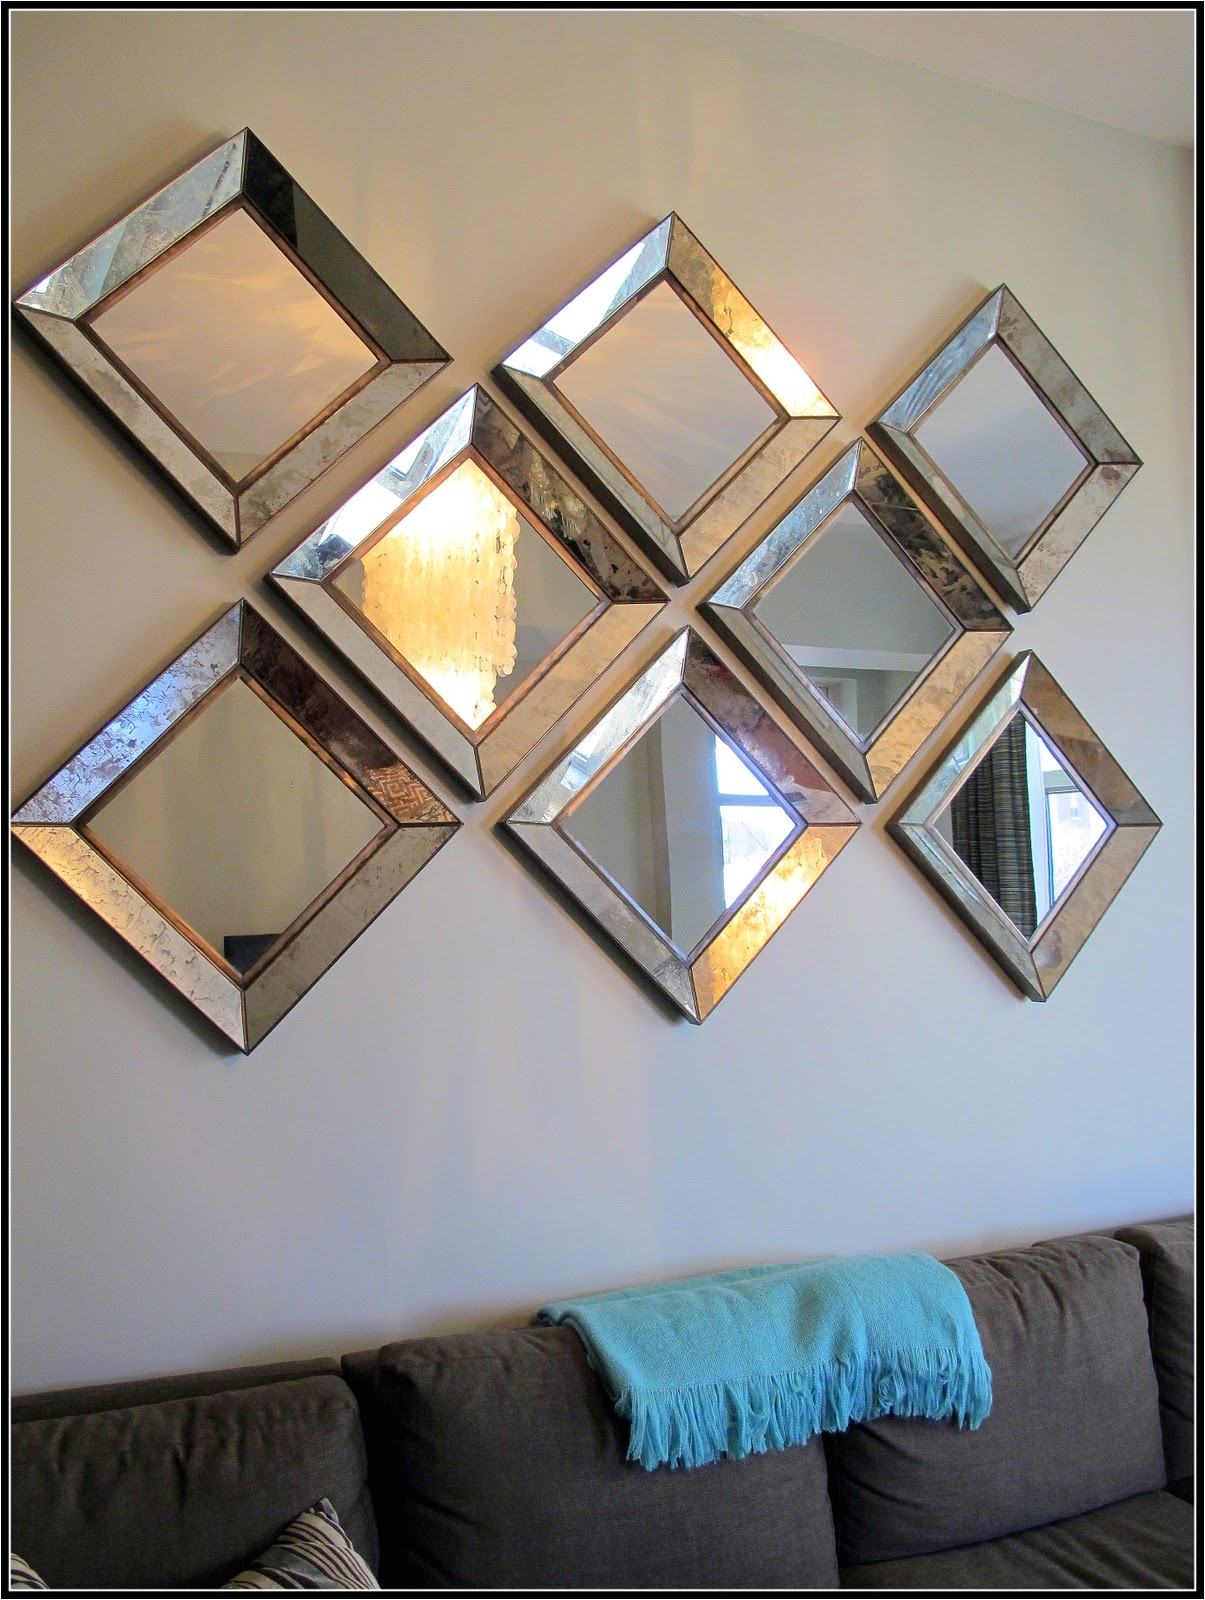 luckily three years later crate barrel still sells the dubois mirrors so we were able to purchase four more and create a diagonal diamond shape that not